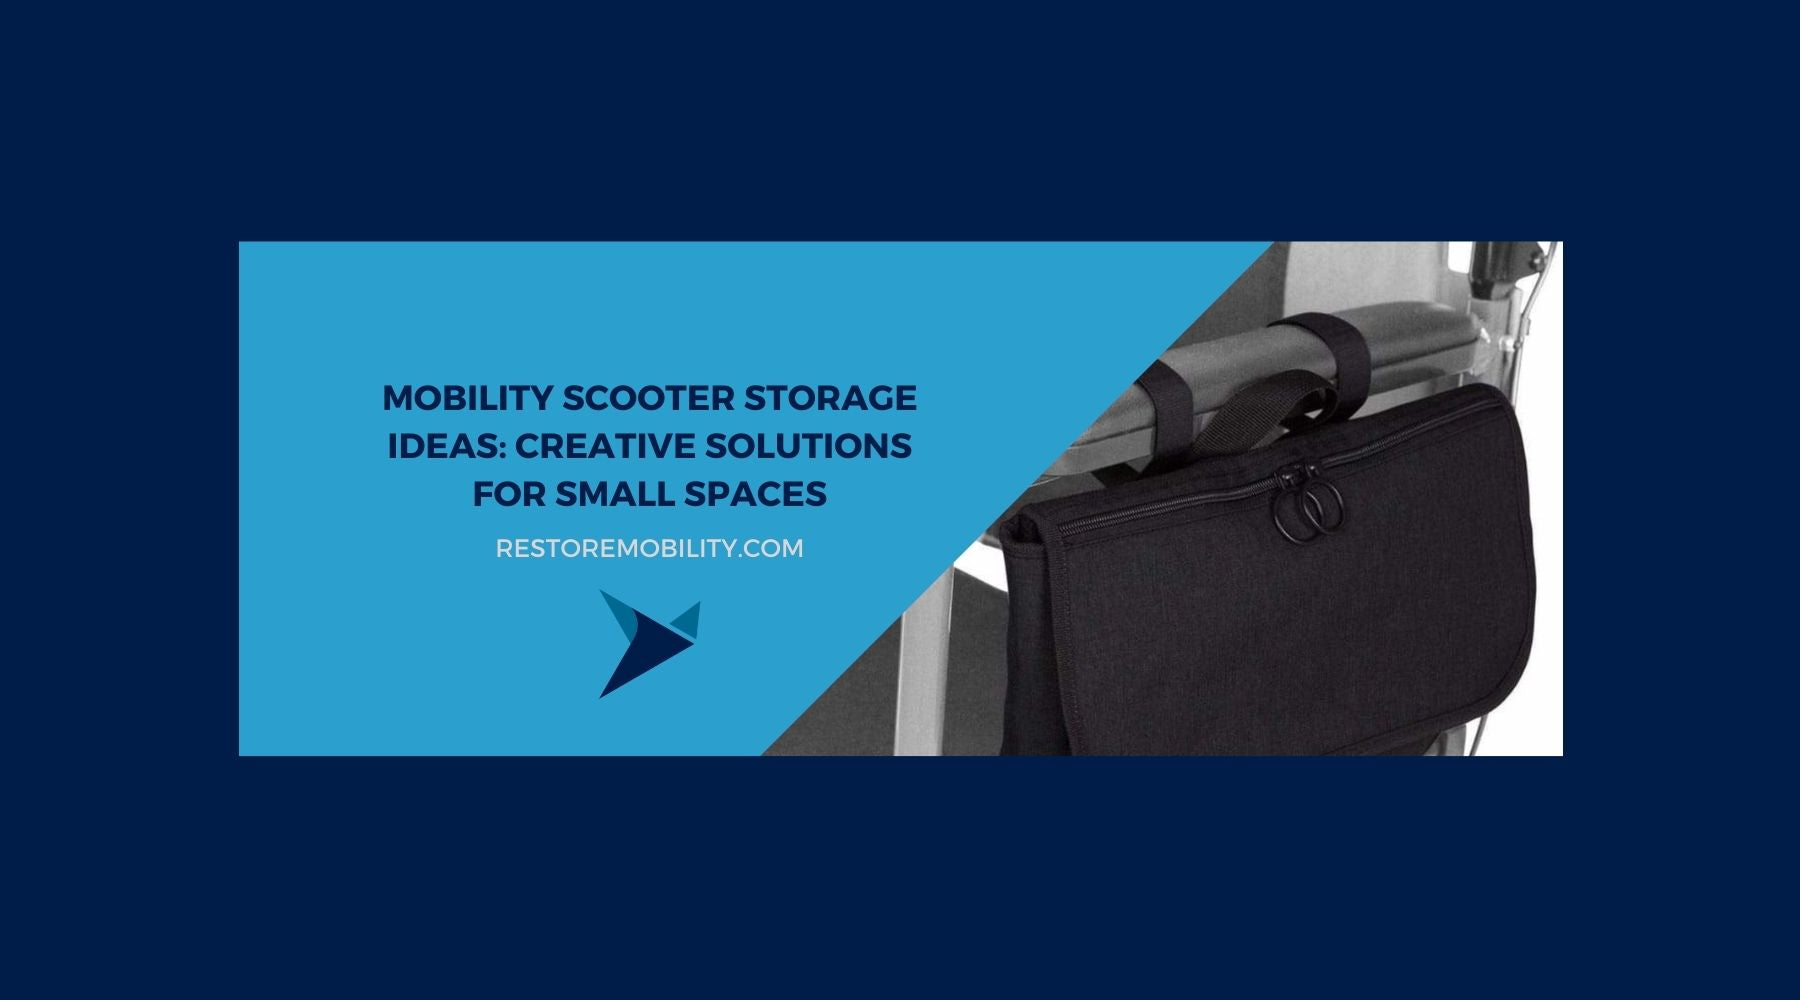 Mobility Scooter Storage Ideas: Creative Solutions